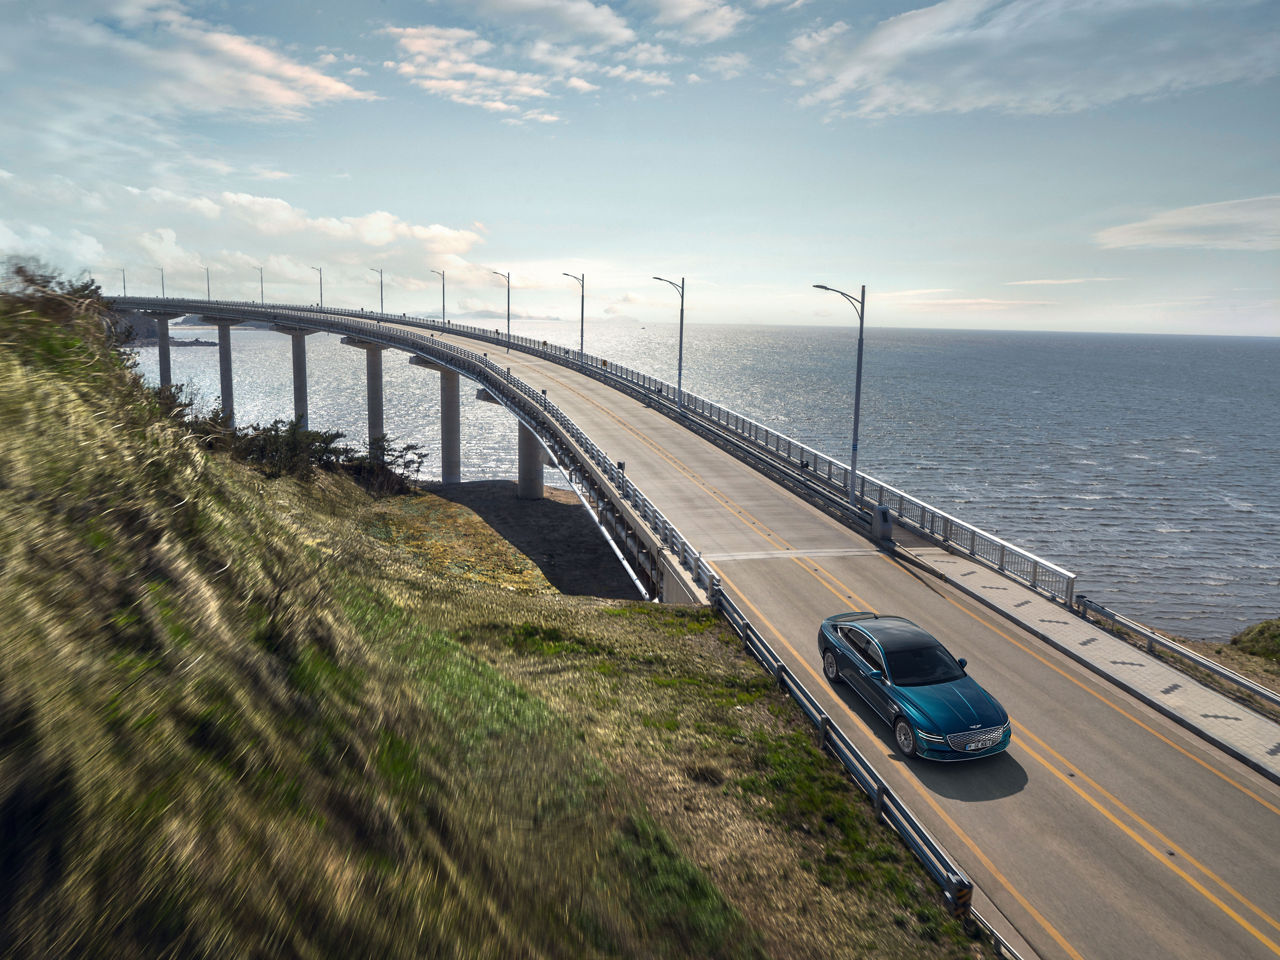 Blue Genesis Electrified G80 drives over a highway bridge by the sea - front view